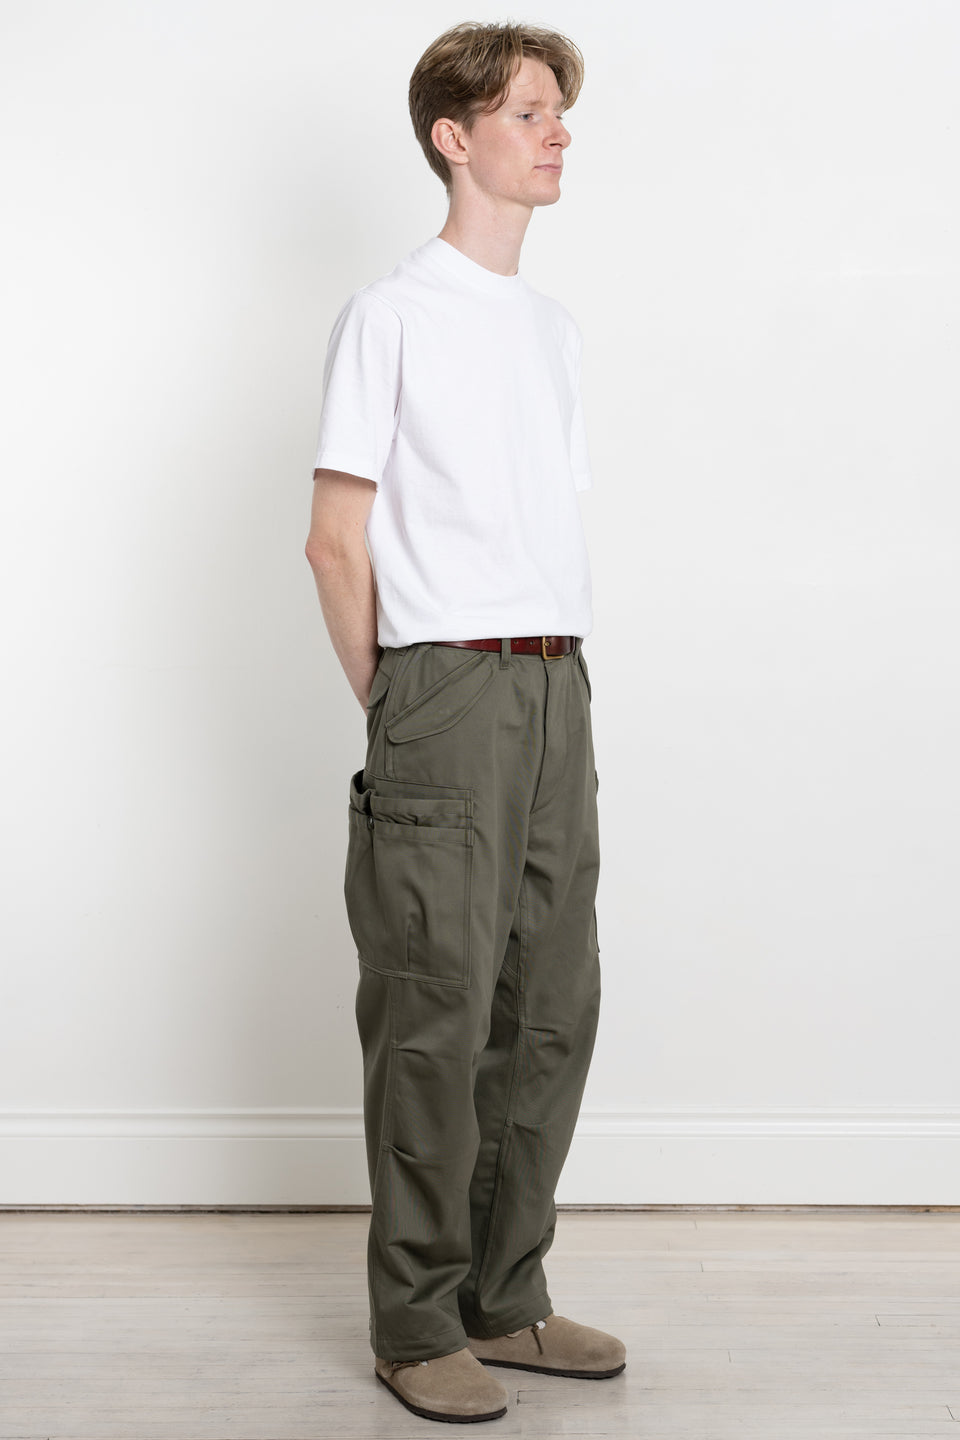 Sassafras Japan 23AW FW23 Men's Collection Overgrown Pants Military Satin Olive Calculus Victoria BC Canada